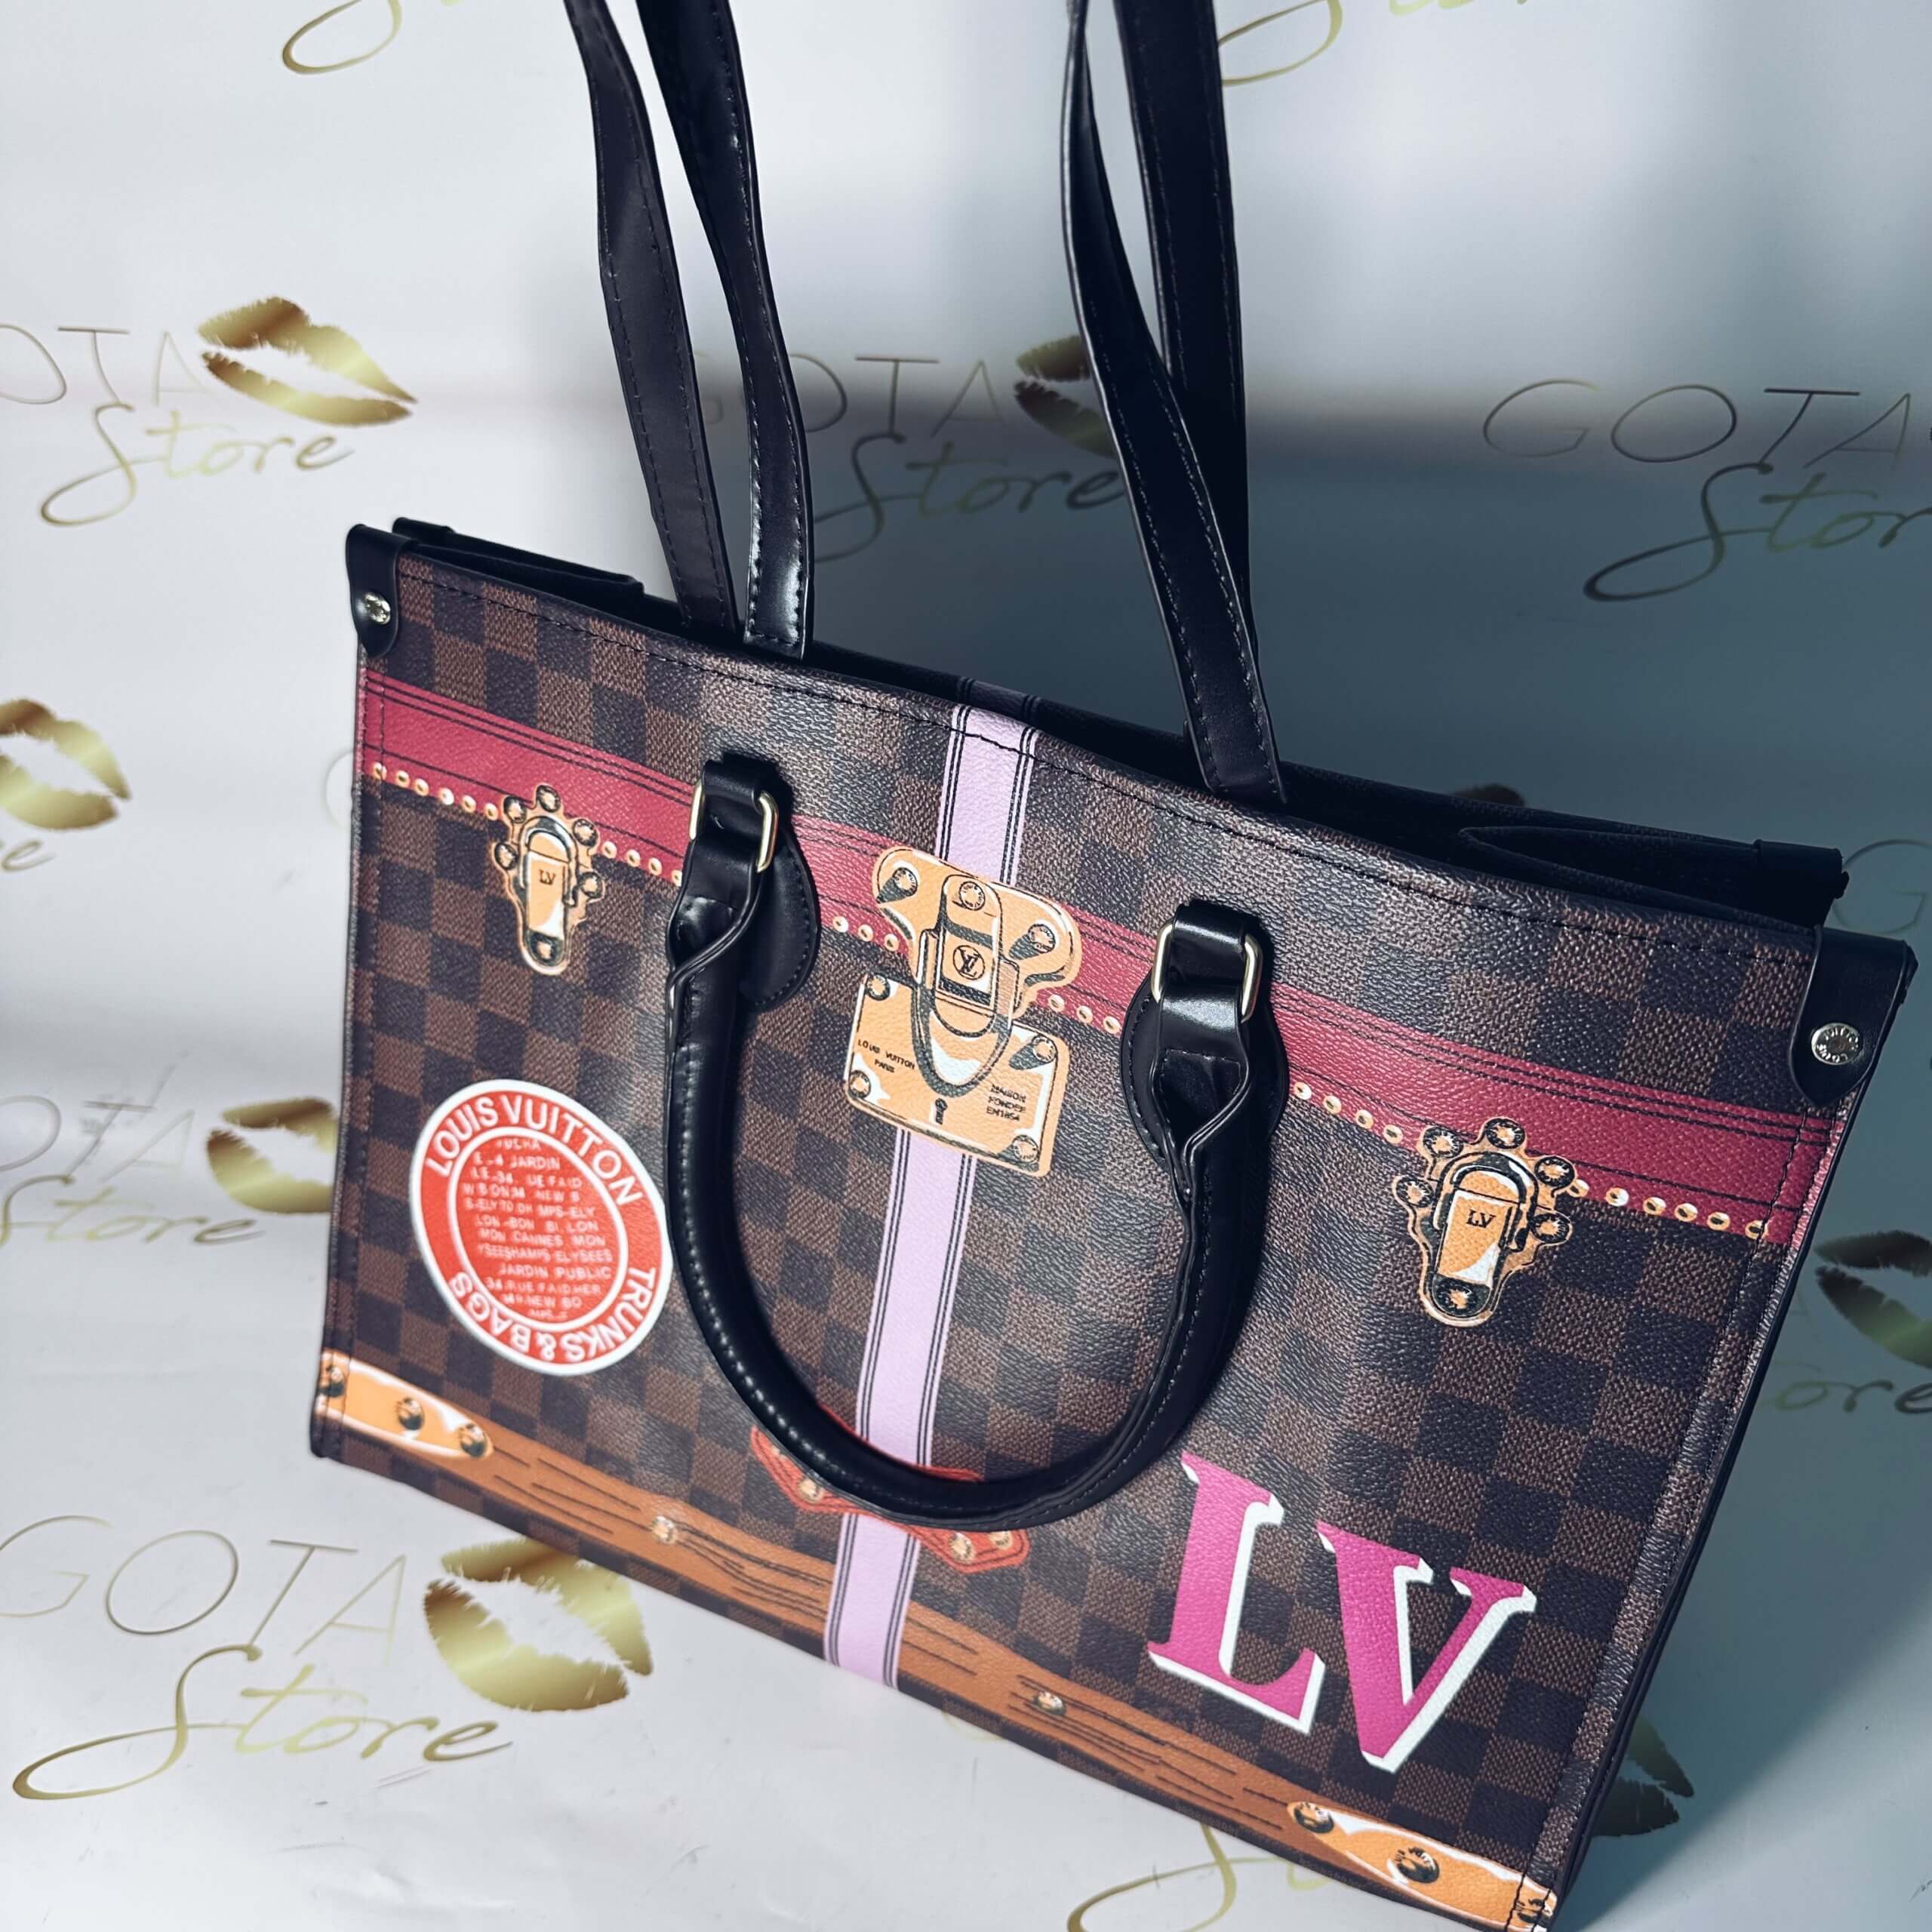 LV Propriano Damier Ebene Printed Large Tote Bag - Brown Leather Women's Purse